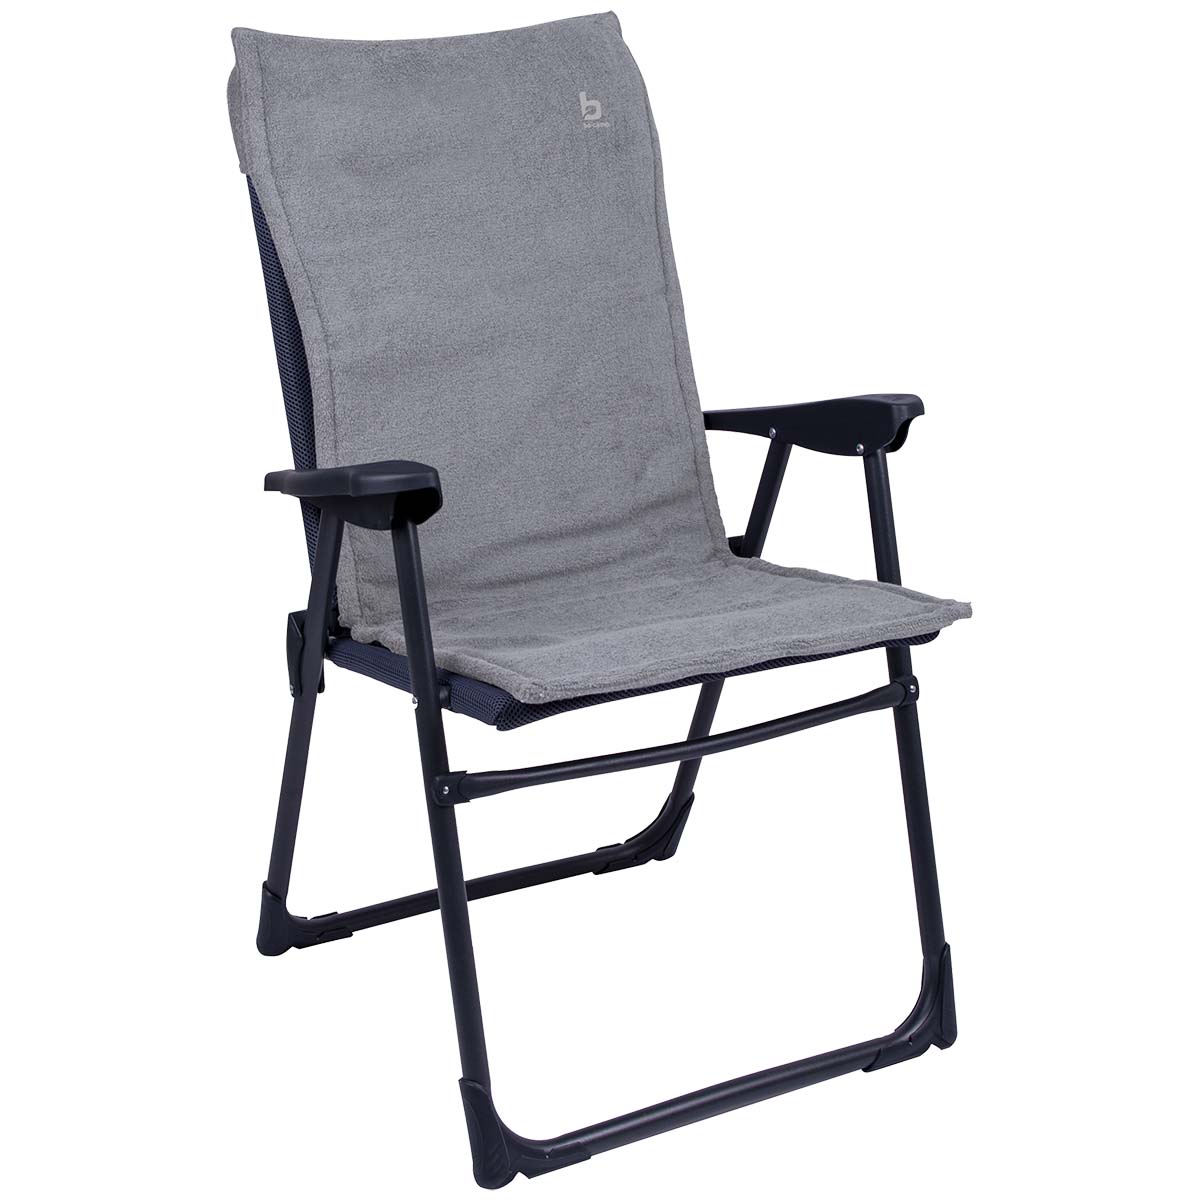 1849267 A universal chair cover for compact (camping)chairs. Offers optimum seating comfort and protection for the chair (for example the Copa Rio). Extra comfort due to the padded terry cloth.